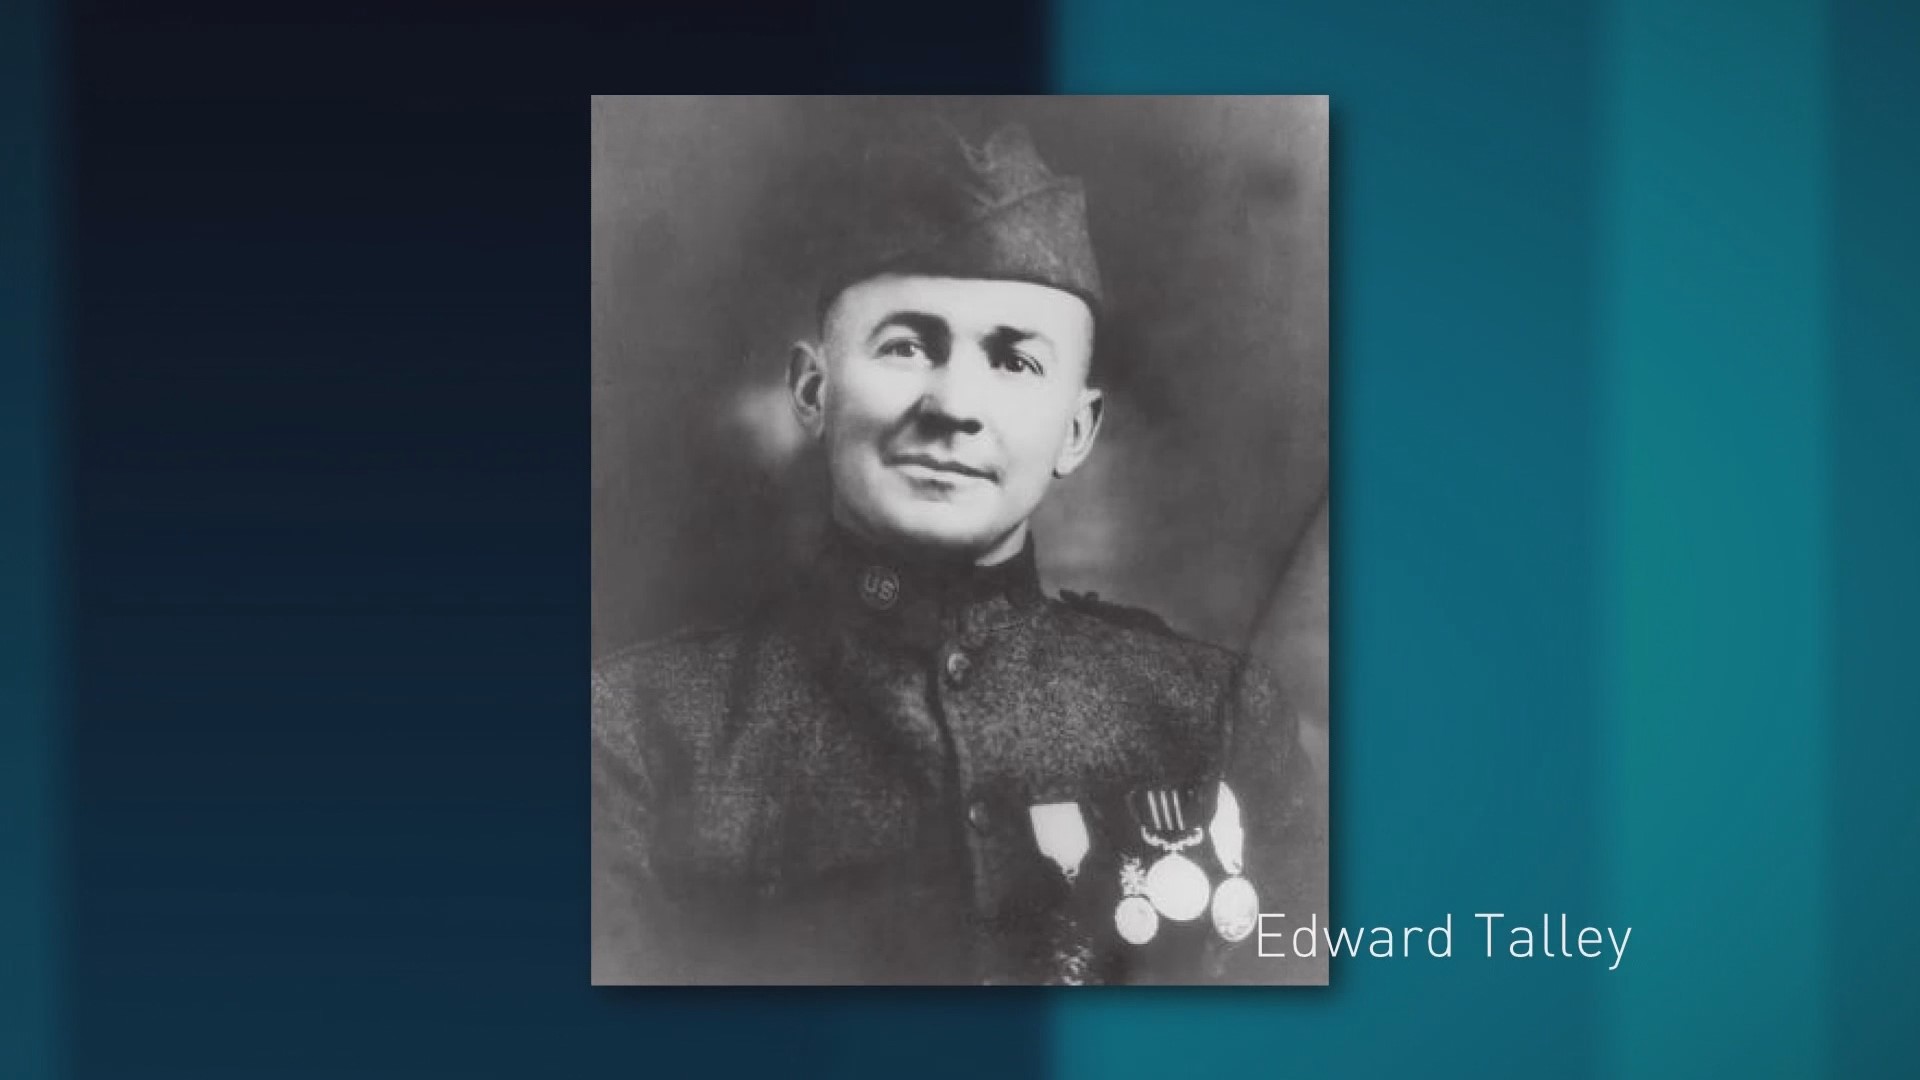 Out of the millions who have served in the U.S. Armed Forces, only 3,507 have received the Medal of Honor. Edward Talley is one of 14 recipients from East Tennessee.